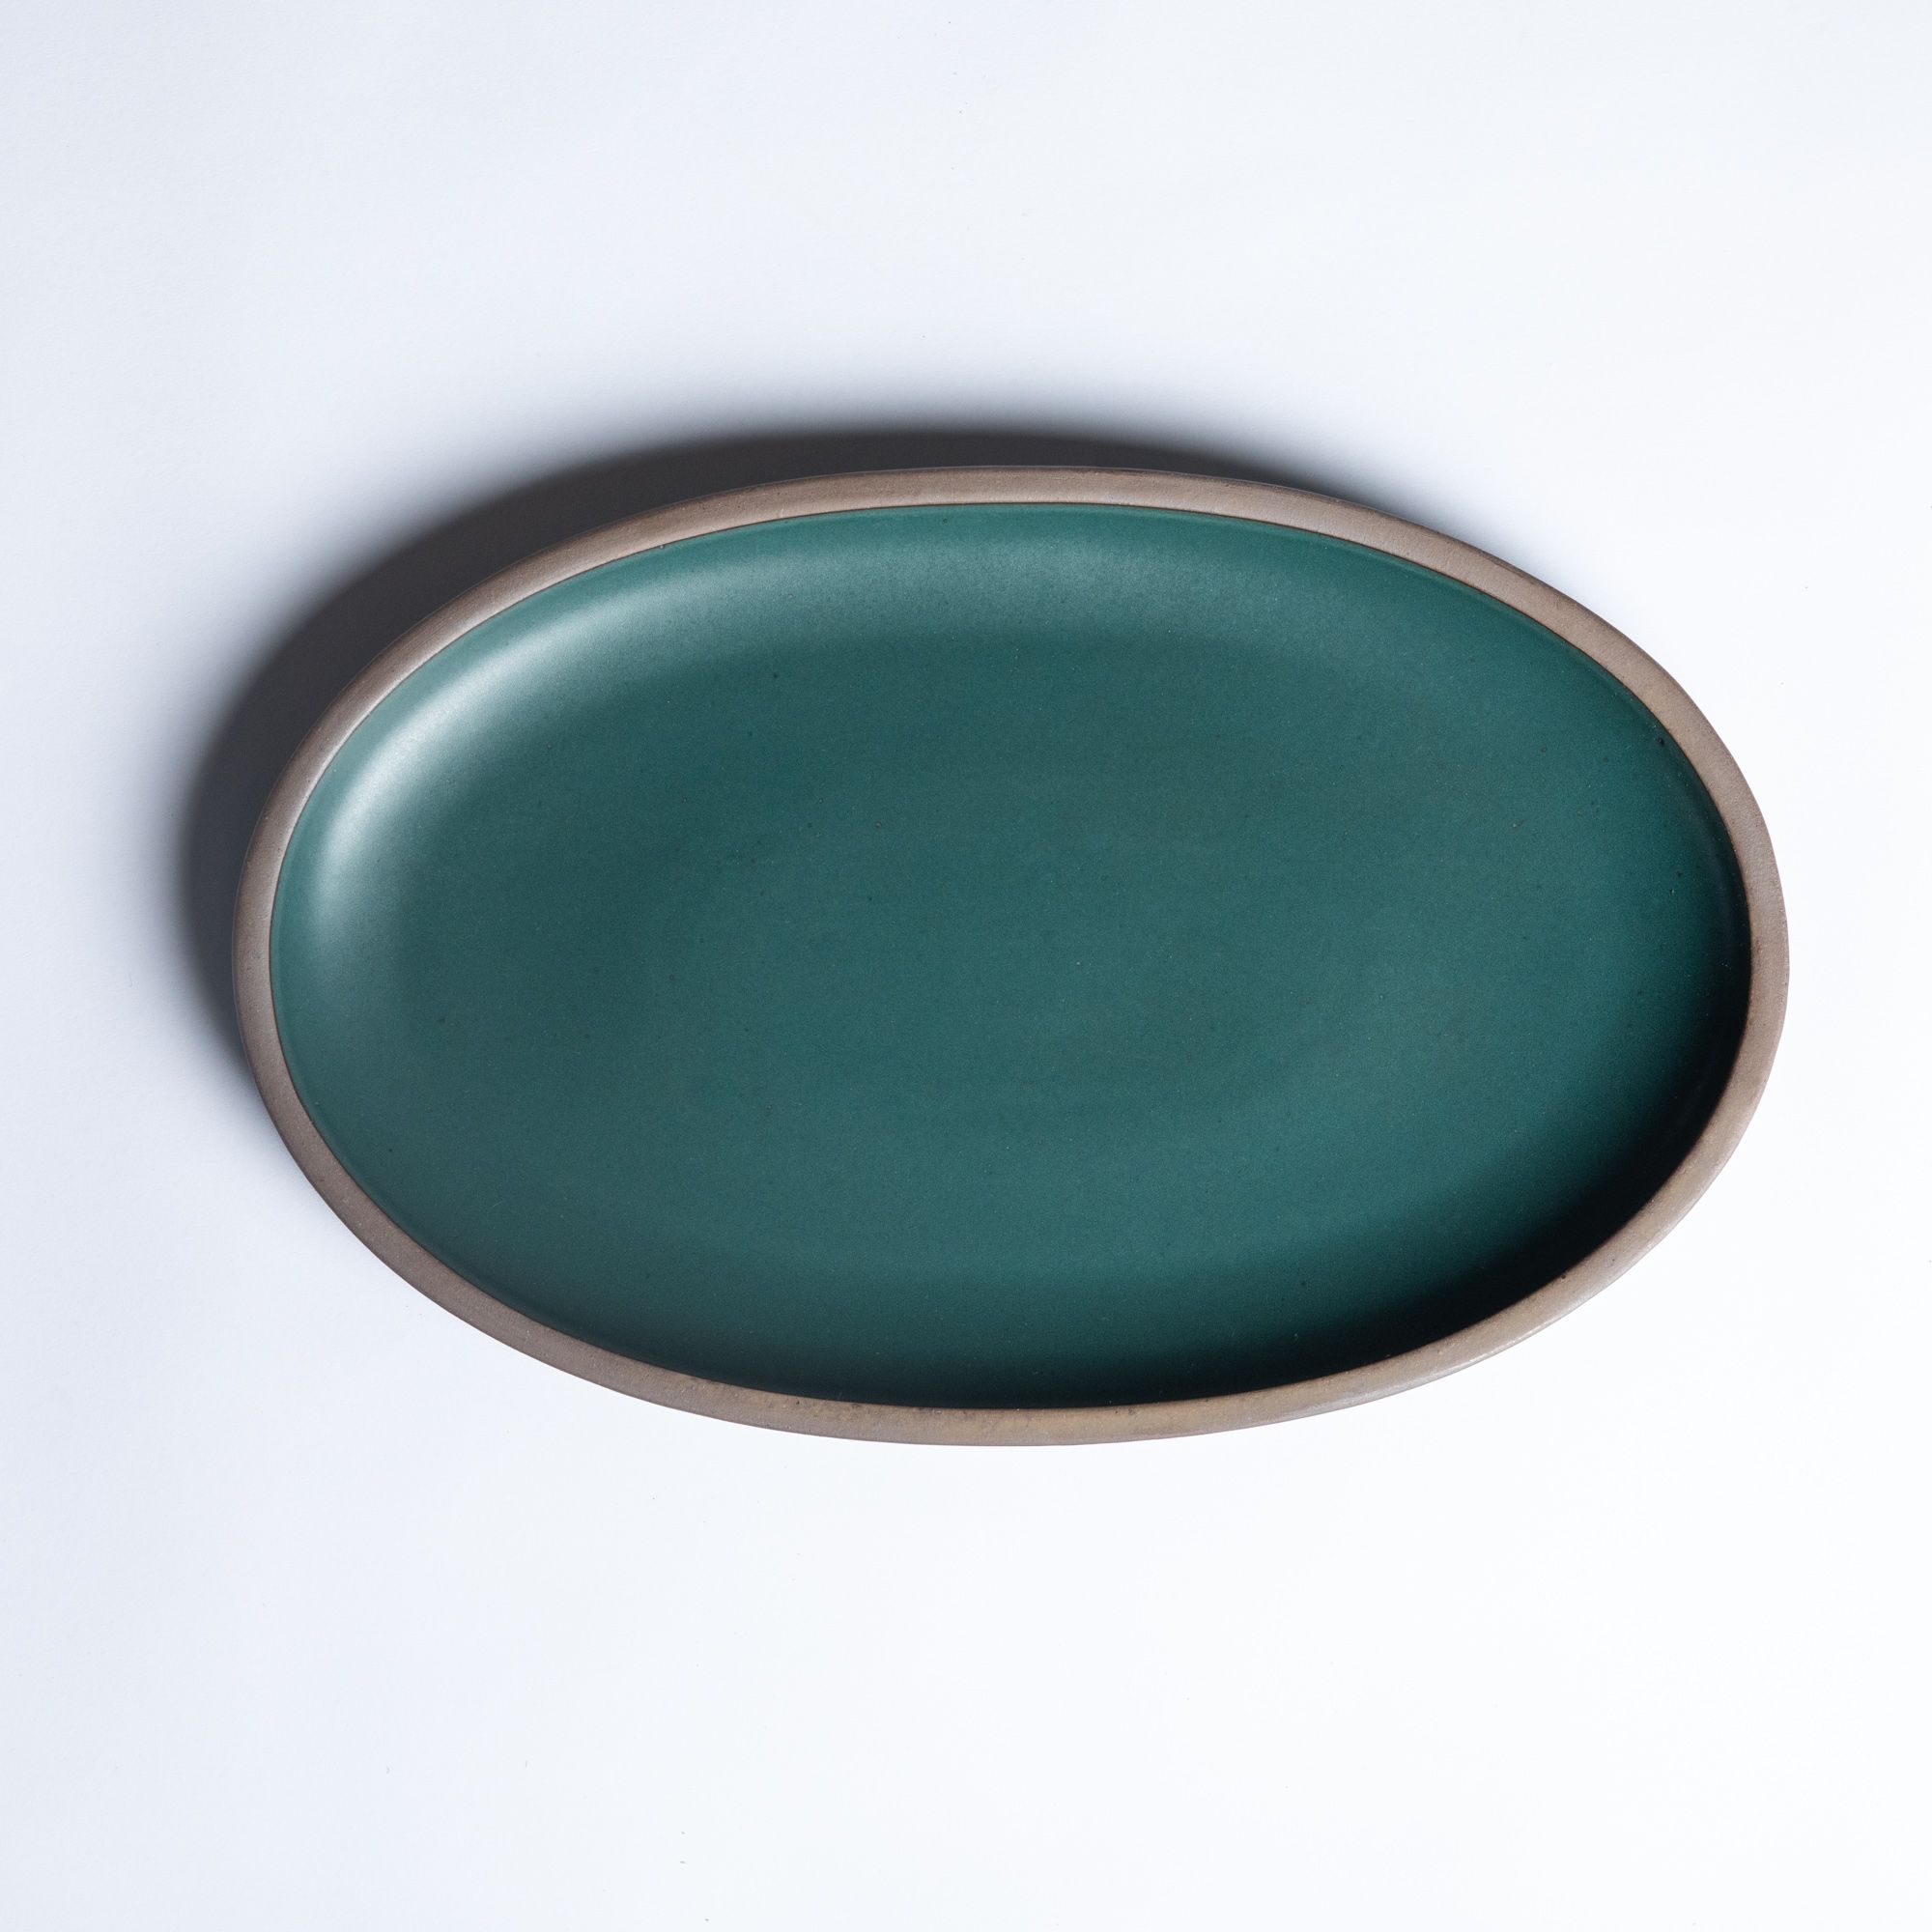 A large oval ceramic platter in a deep, dark teal color featuring iron speckles and an unglazed rim